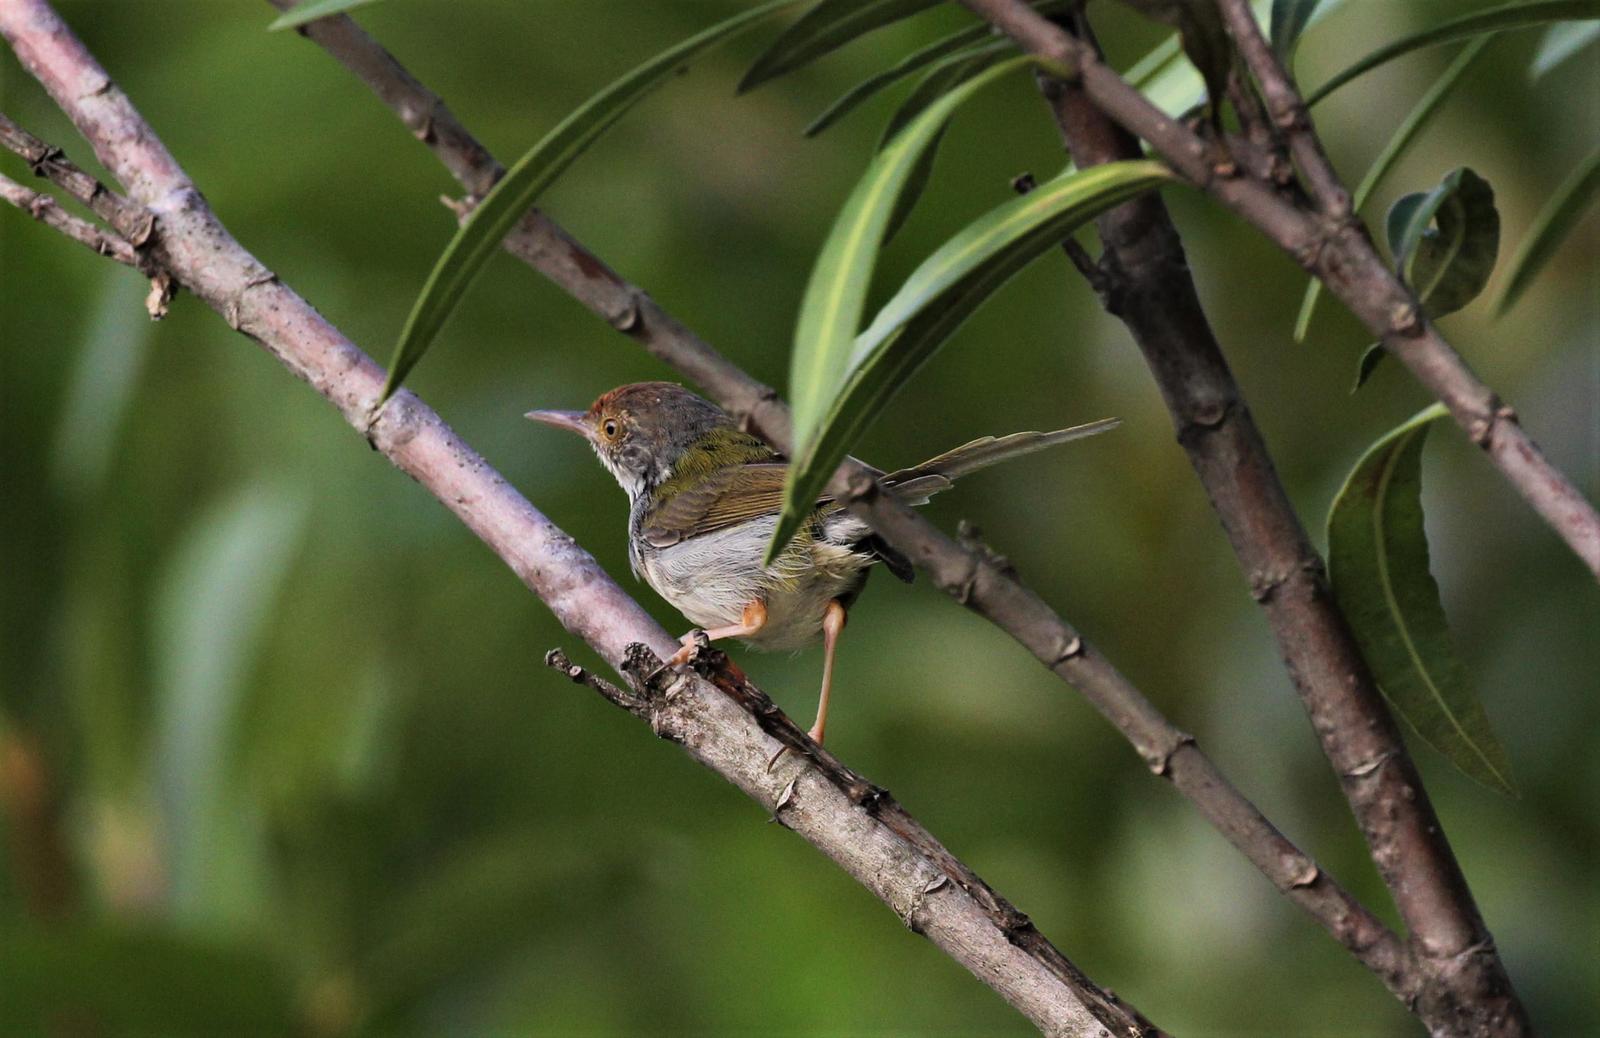 Common Tailorbird Photo by Steven Cheong